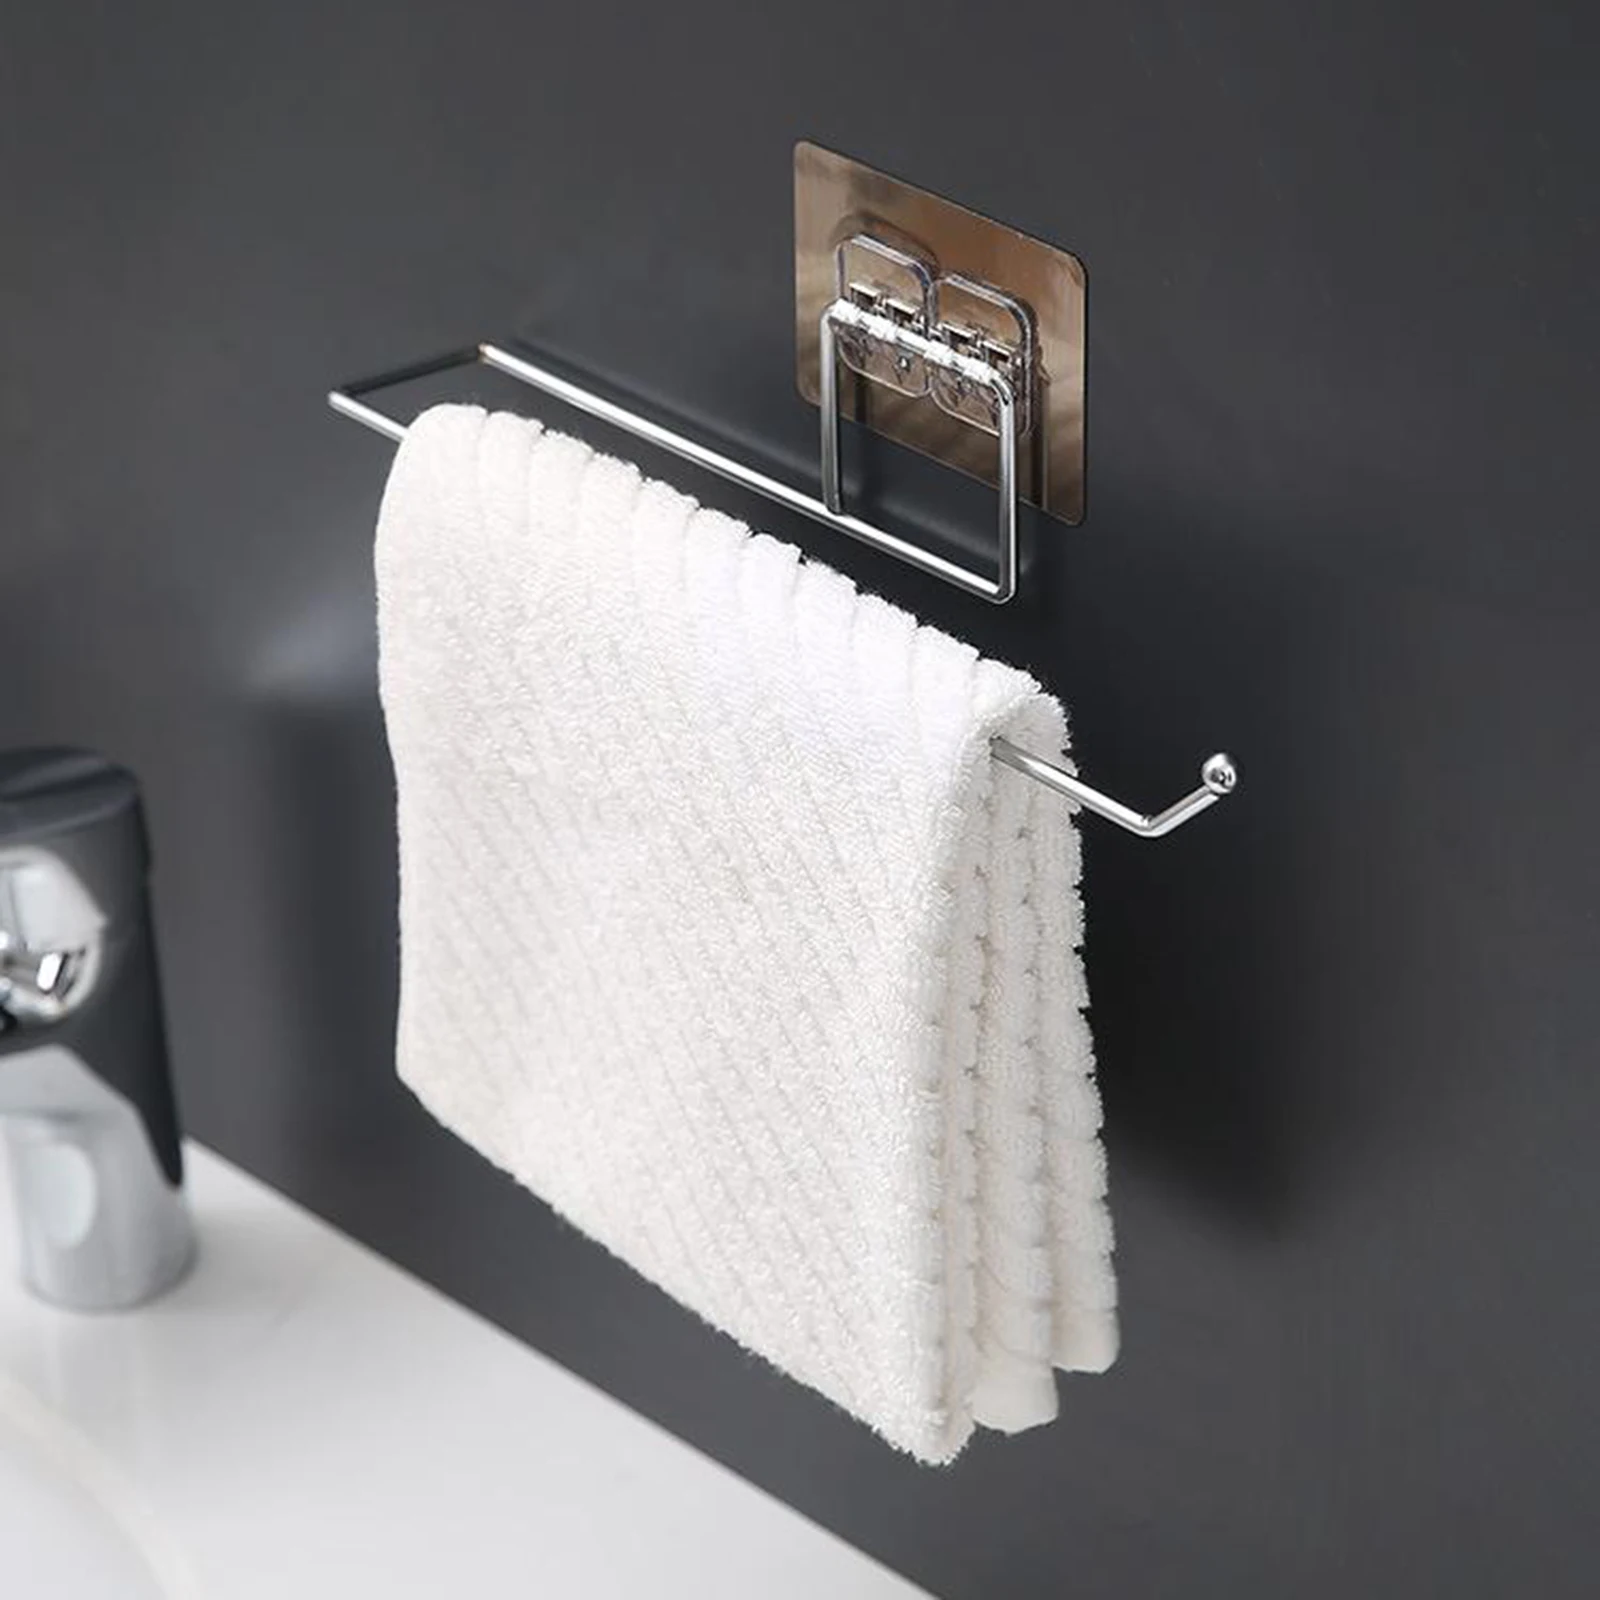 Toilet Paper Towel Holder Stainless Steel Self Adhesive on Smooth Surfaces